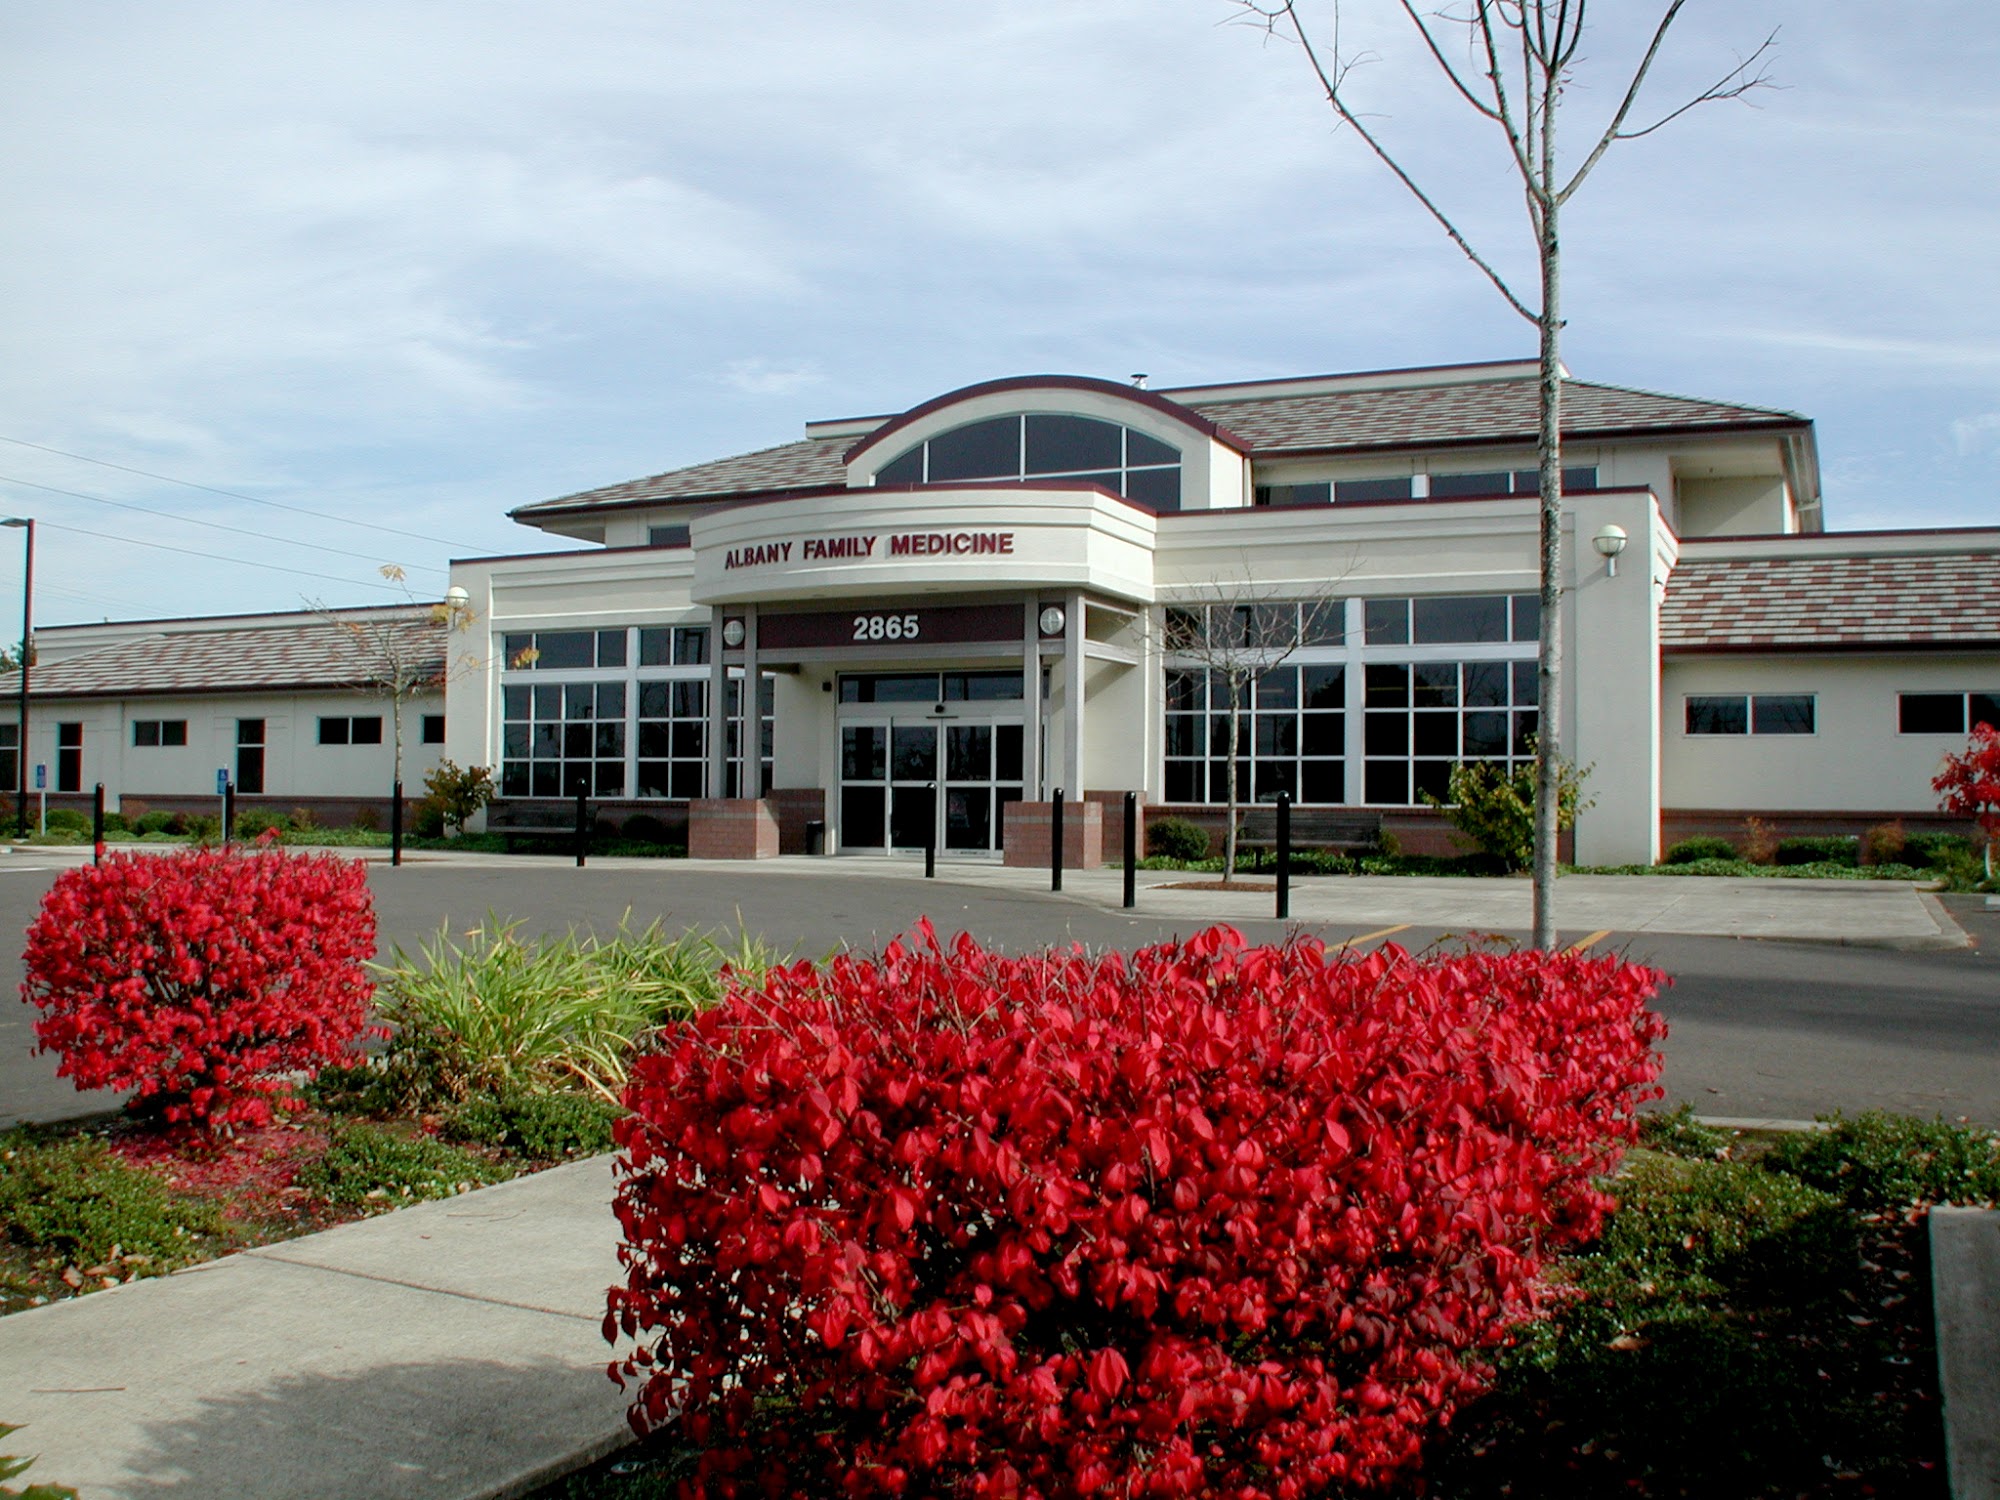 The Corvallis Clinic at Waverly Drive/Albany